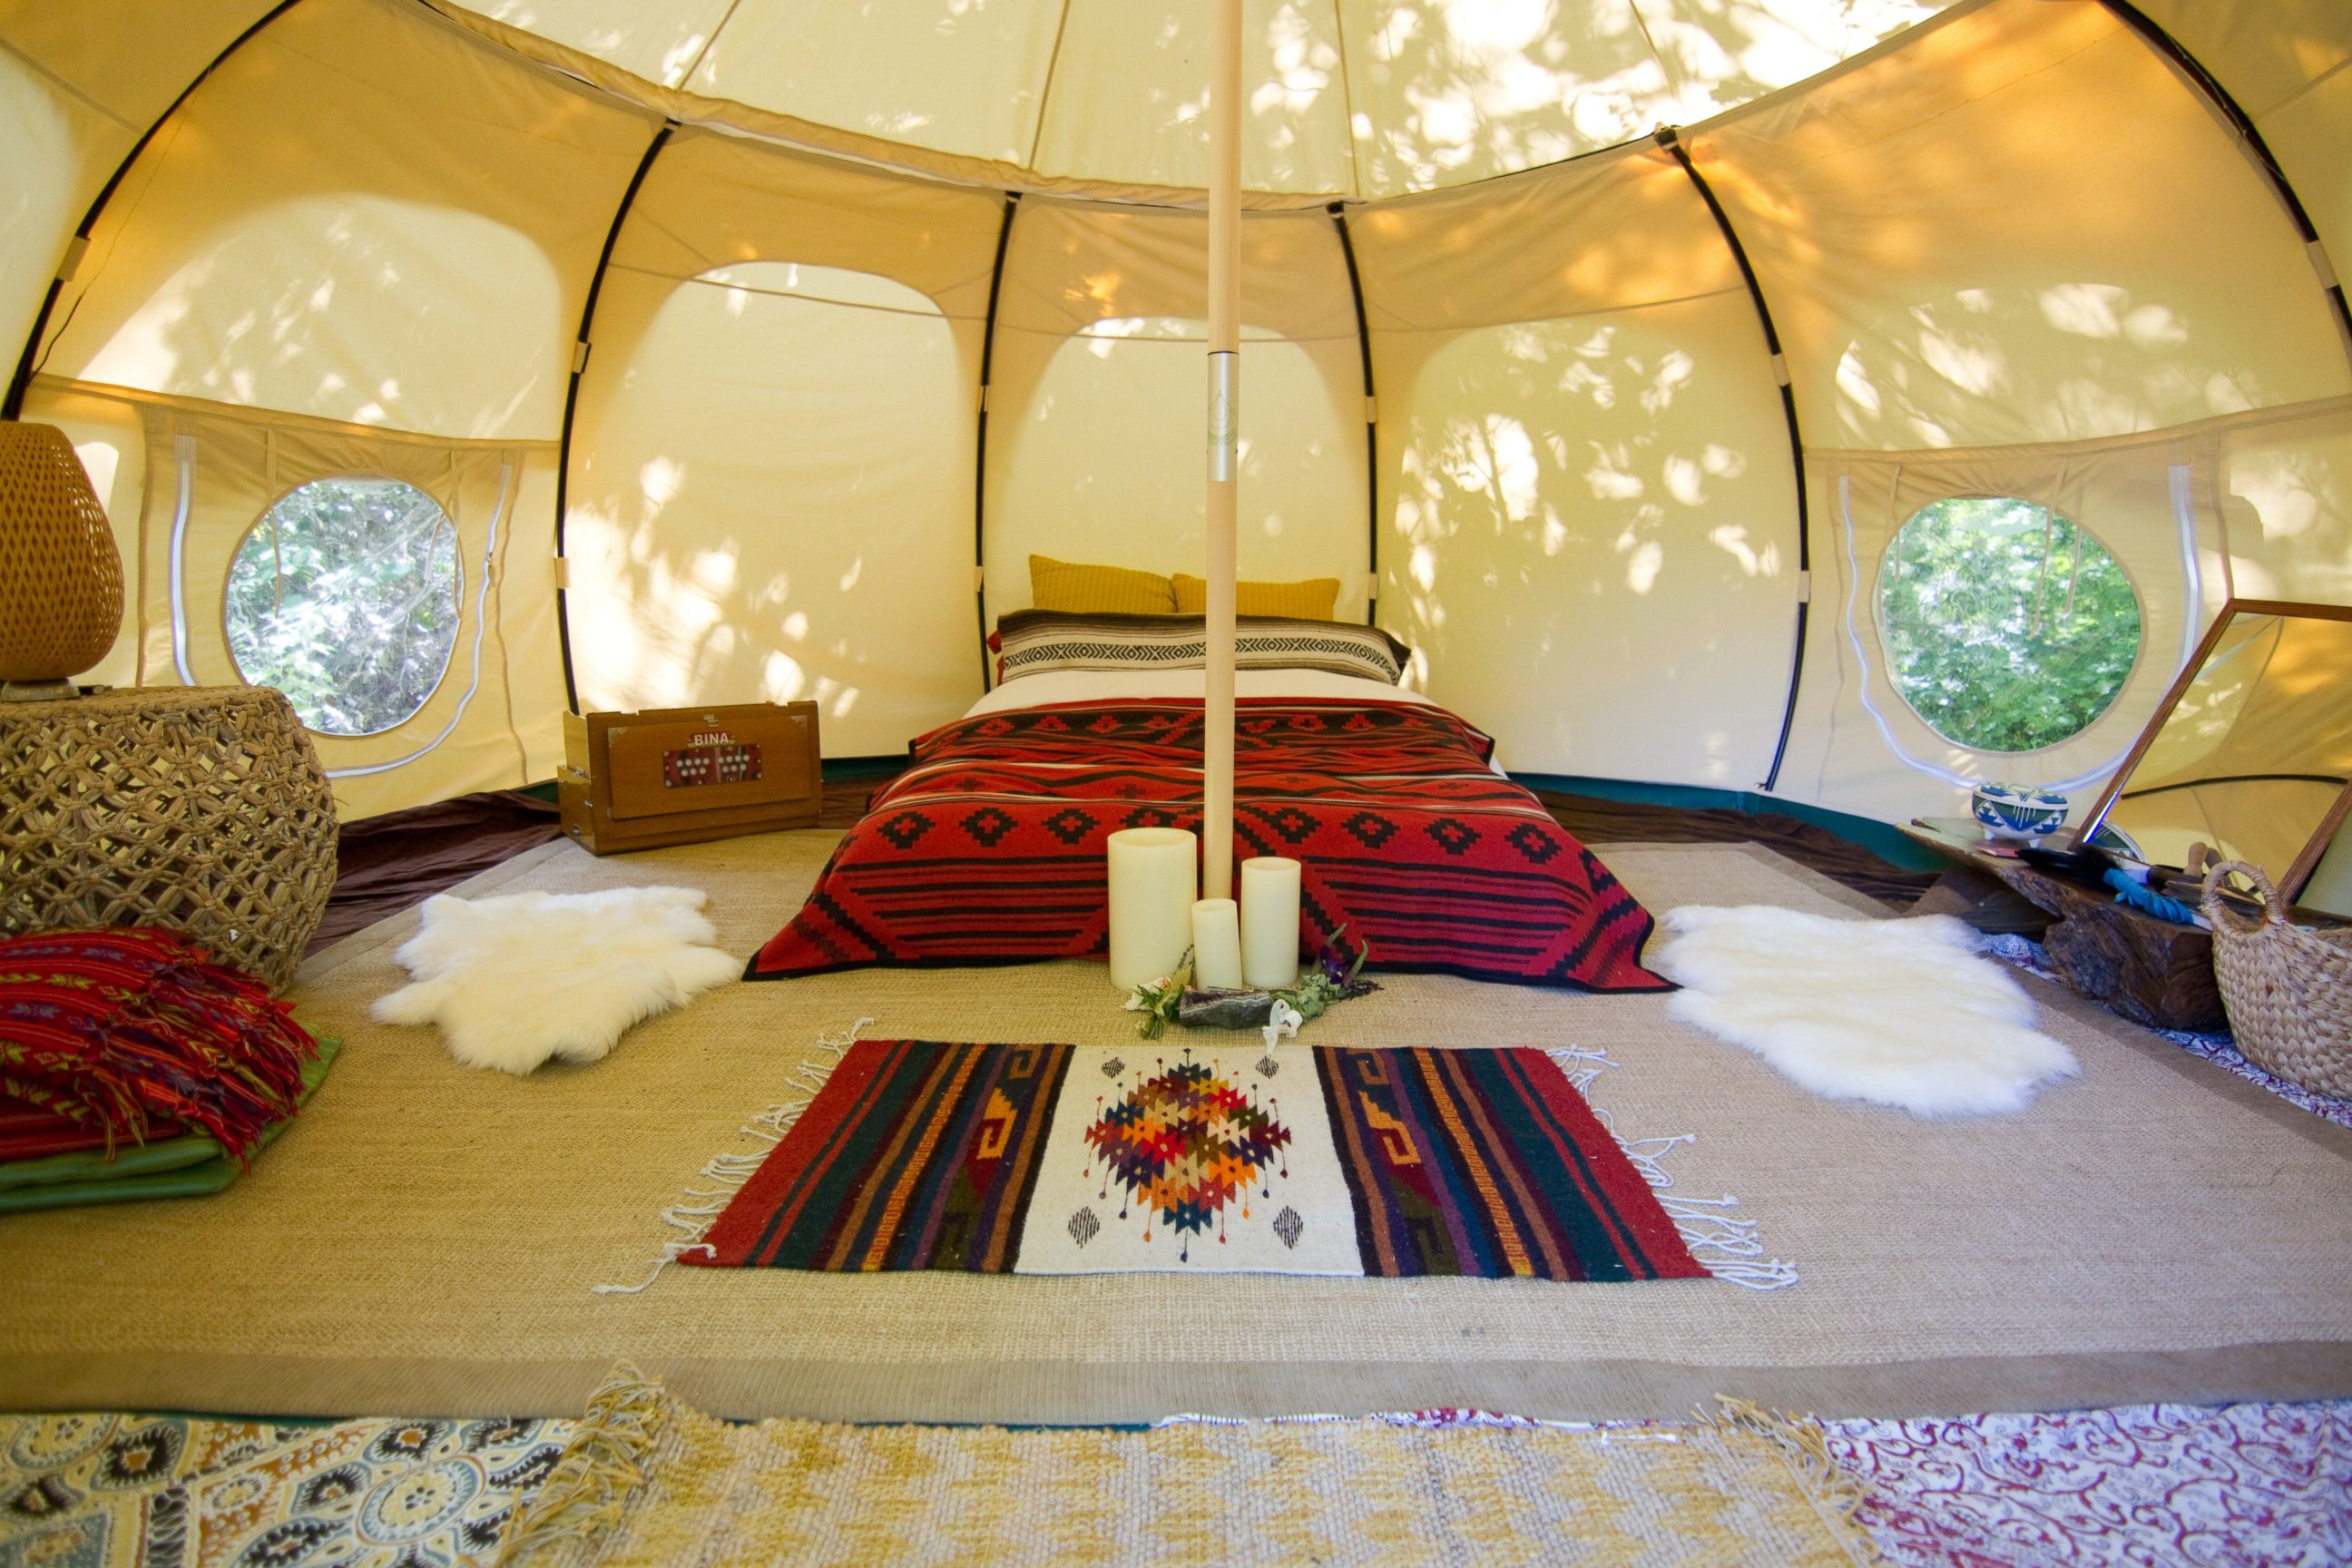 PHOTO: This luxury yurt tent is located in the middle of a vineyard in Sebastopol, Calif.